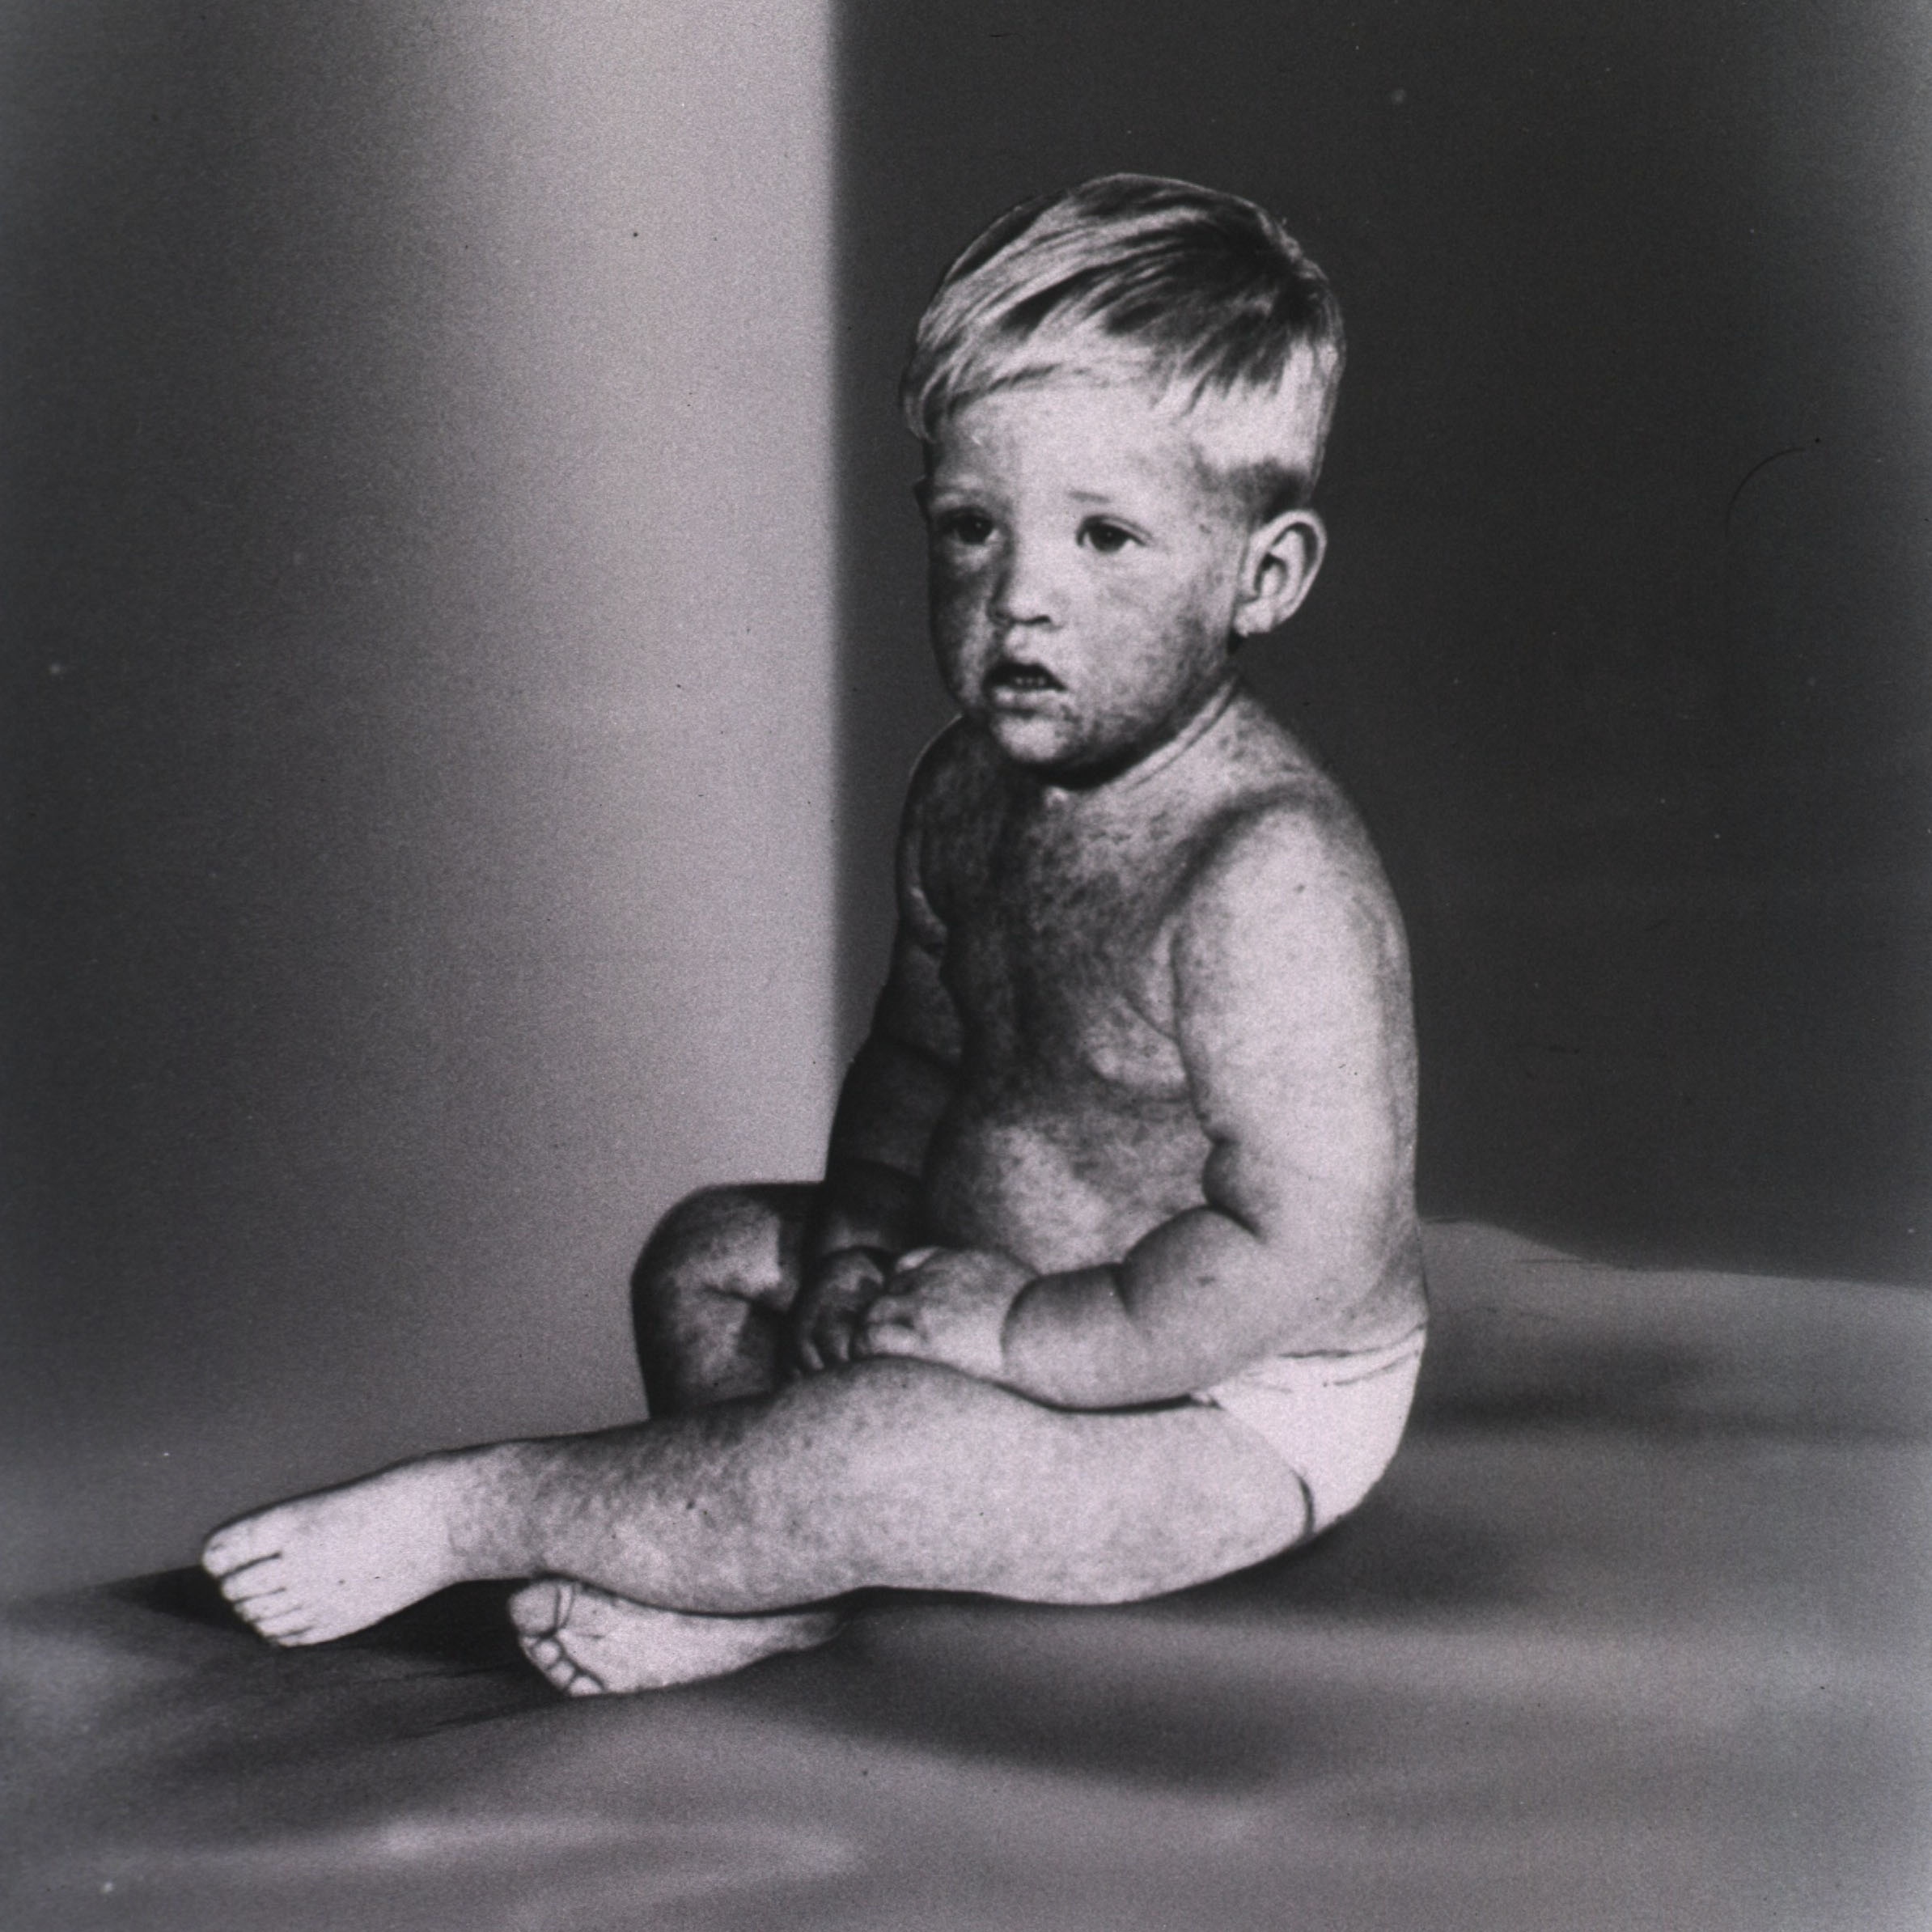 A monochromatic image of a toddler covered in a rash due to a measles infection